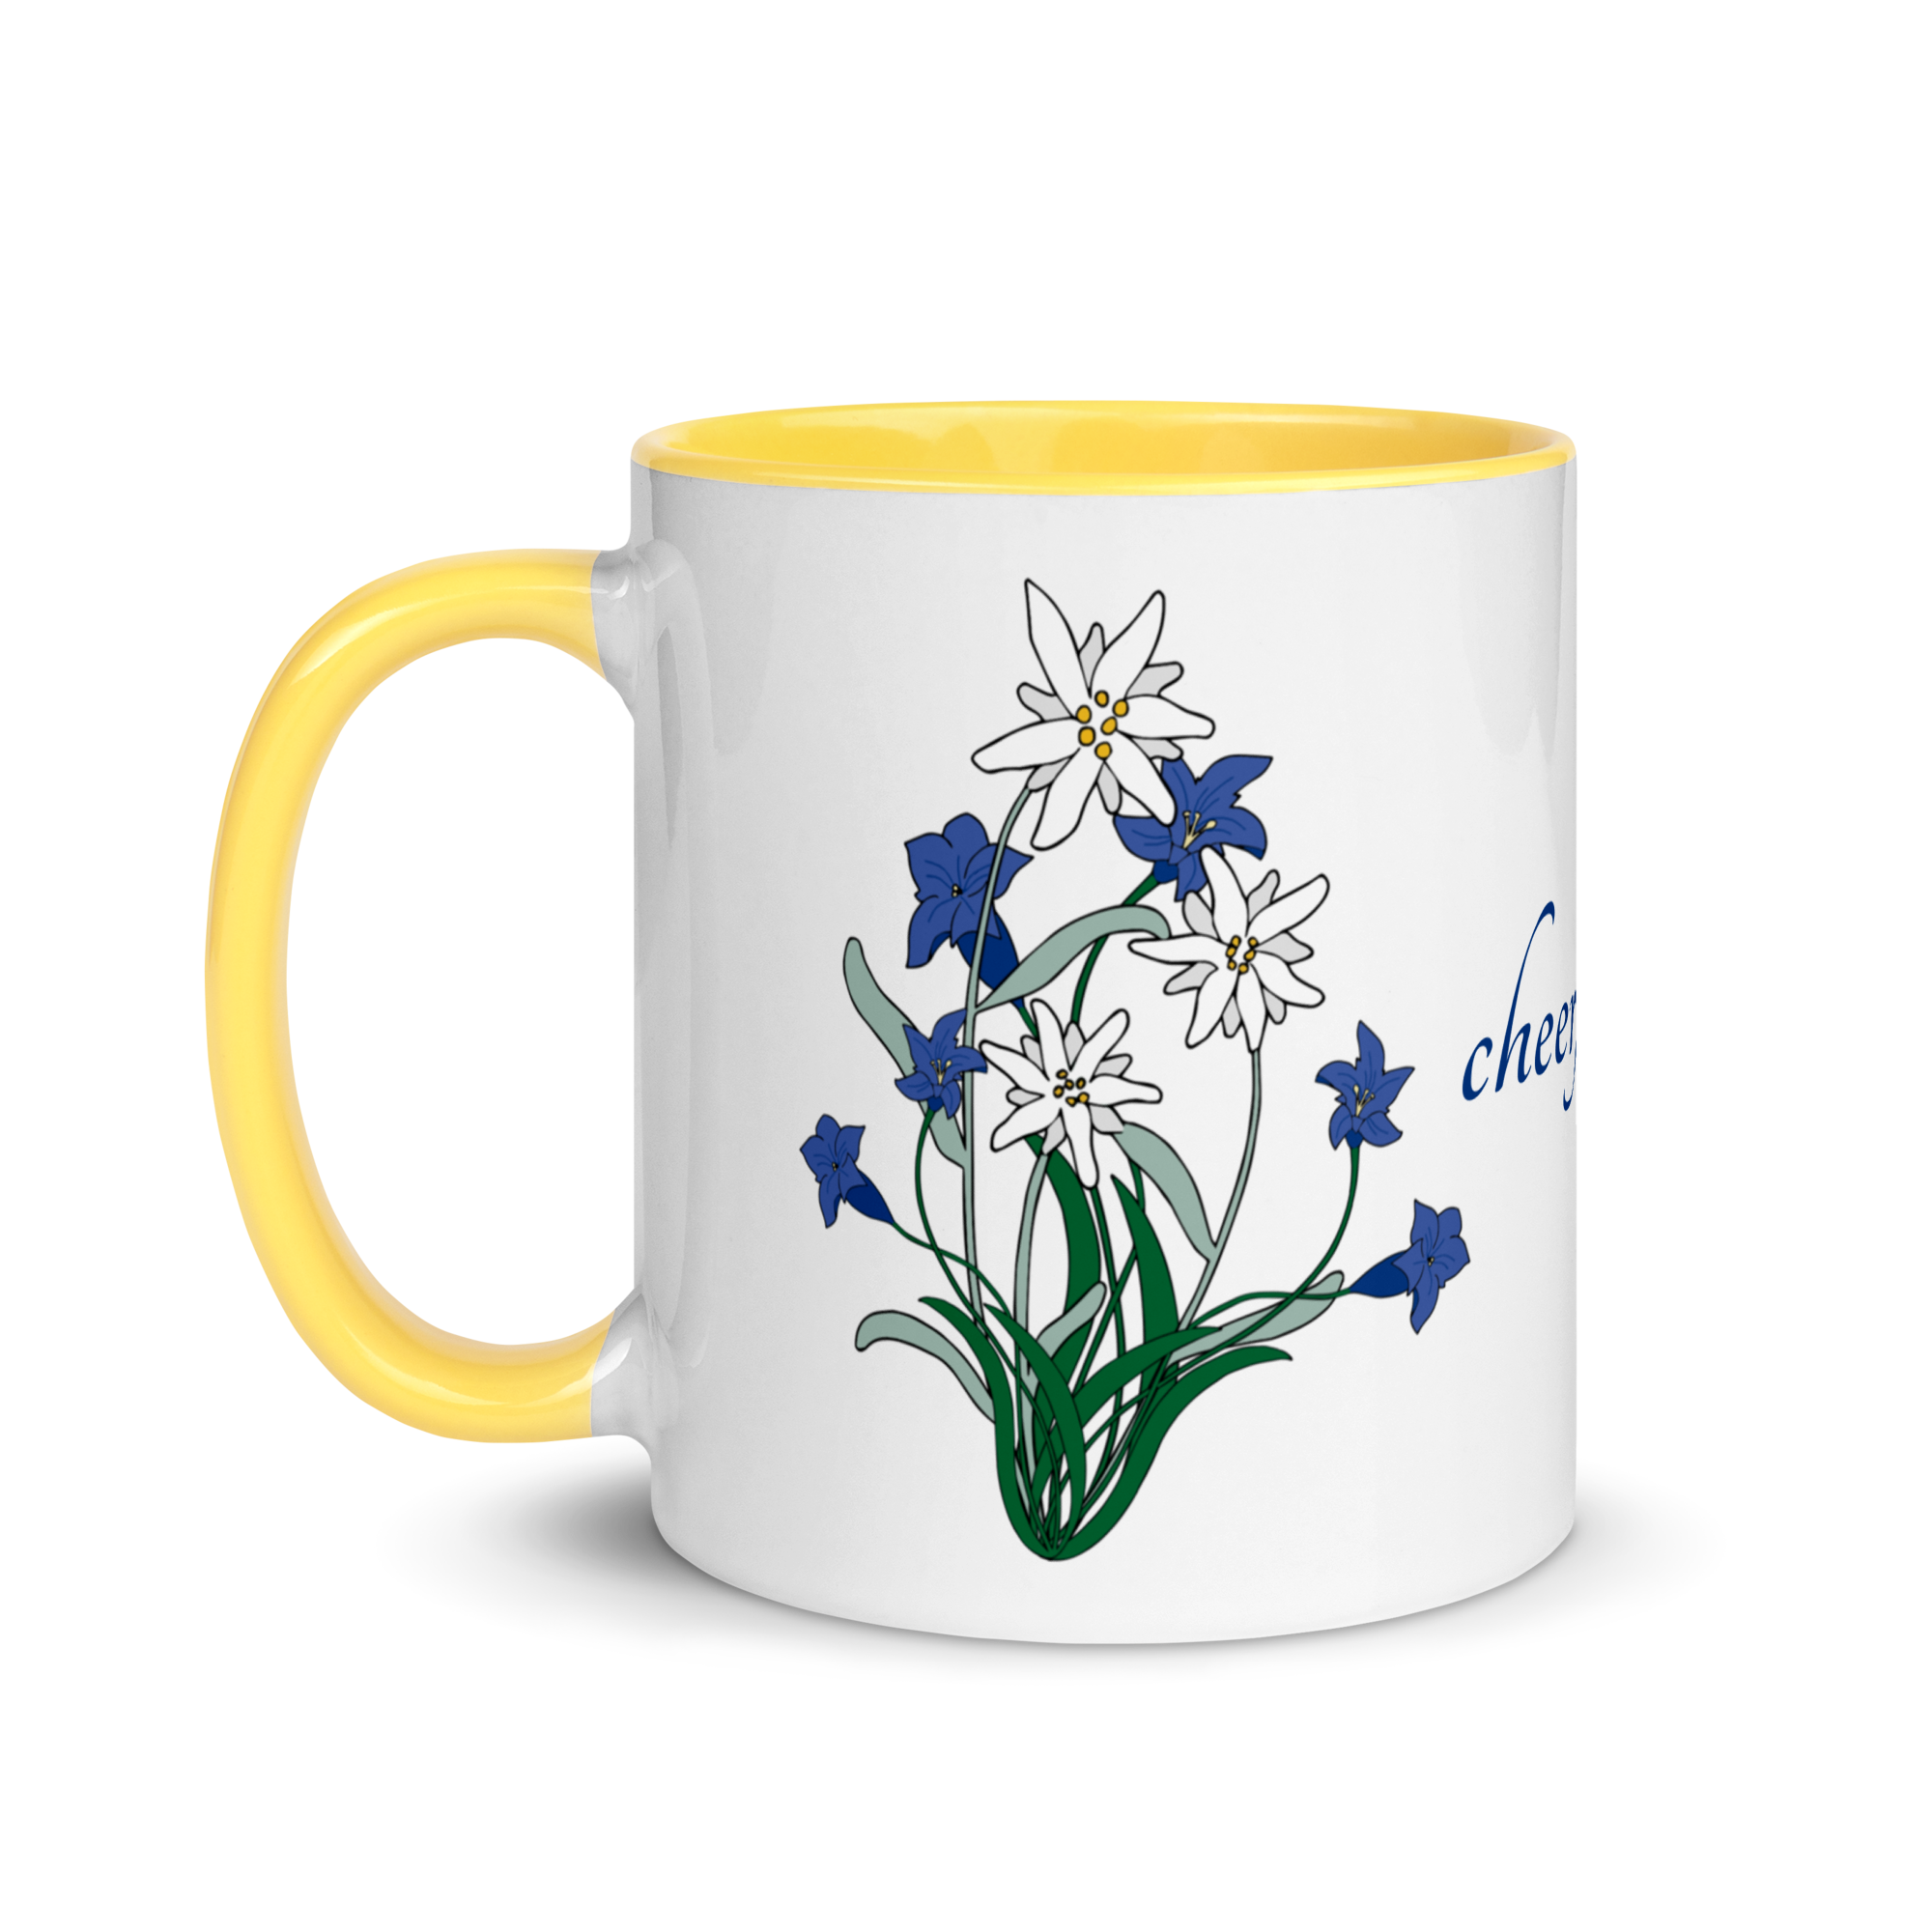 Edelweiss and Gentian Cheerfulness Mug with Yellow Inside